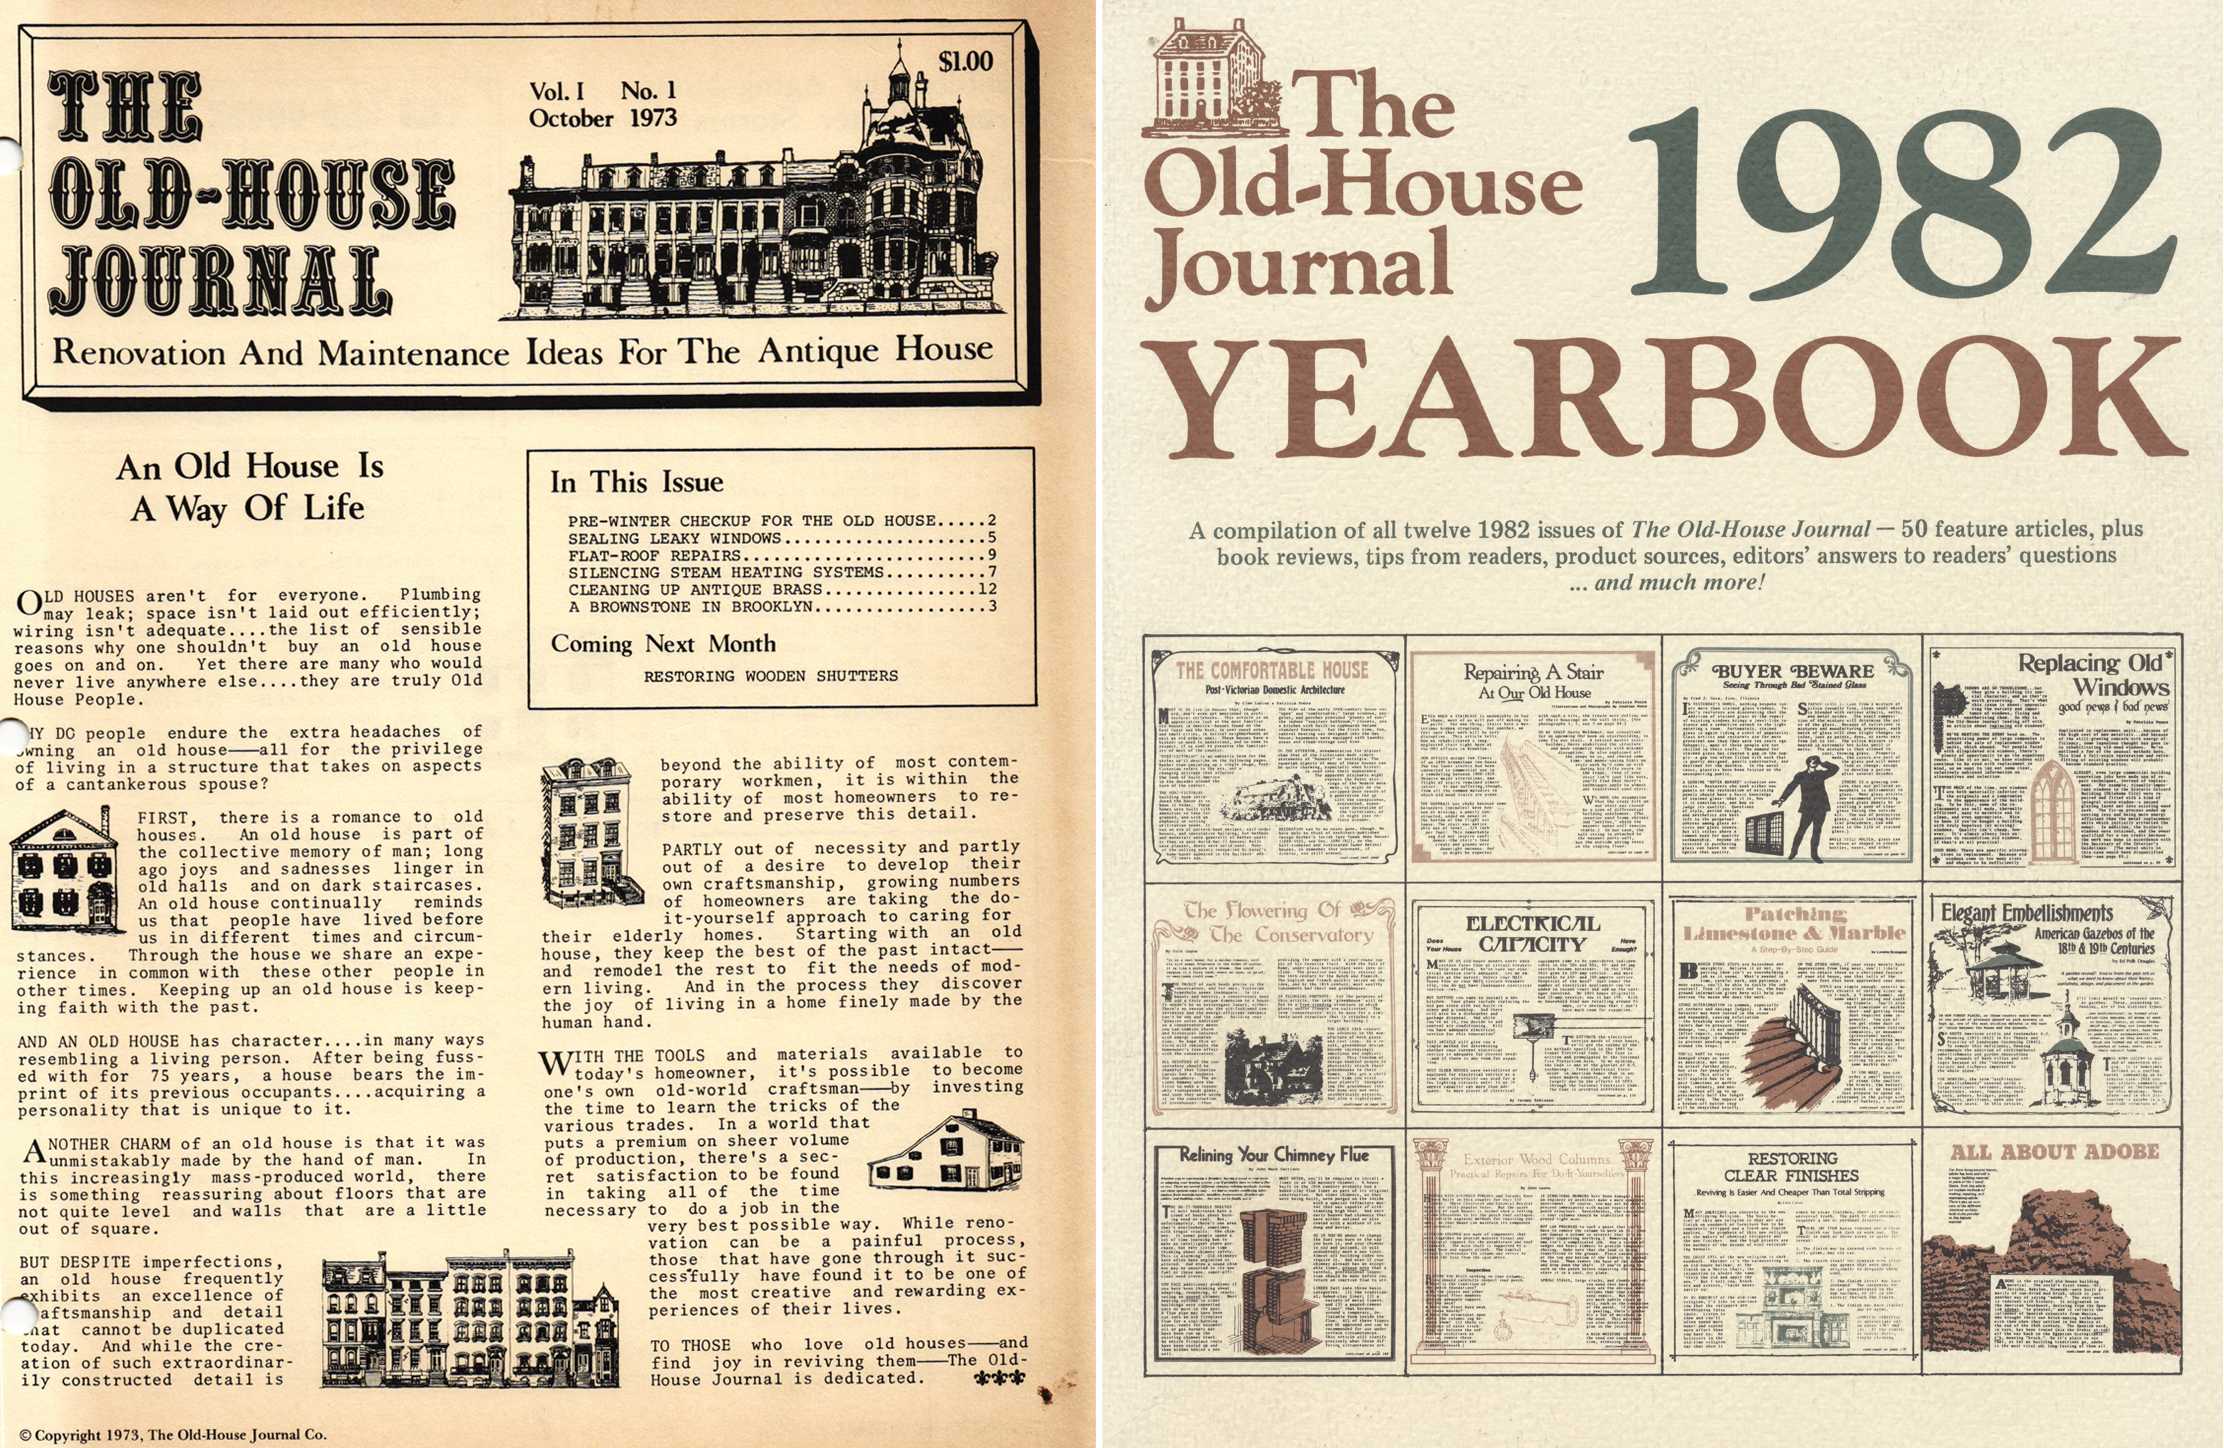 covers of the newsletter and yearbook from 1982